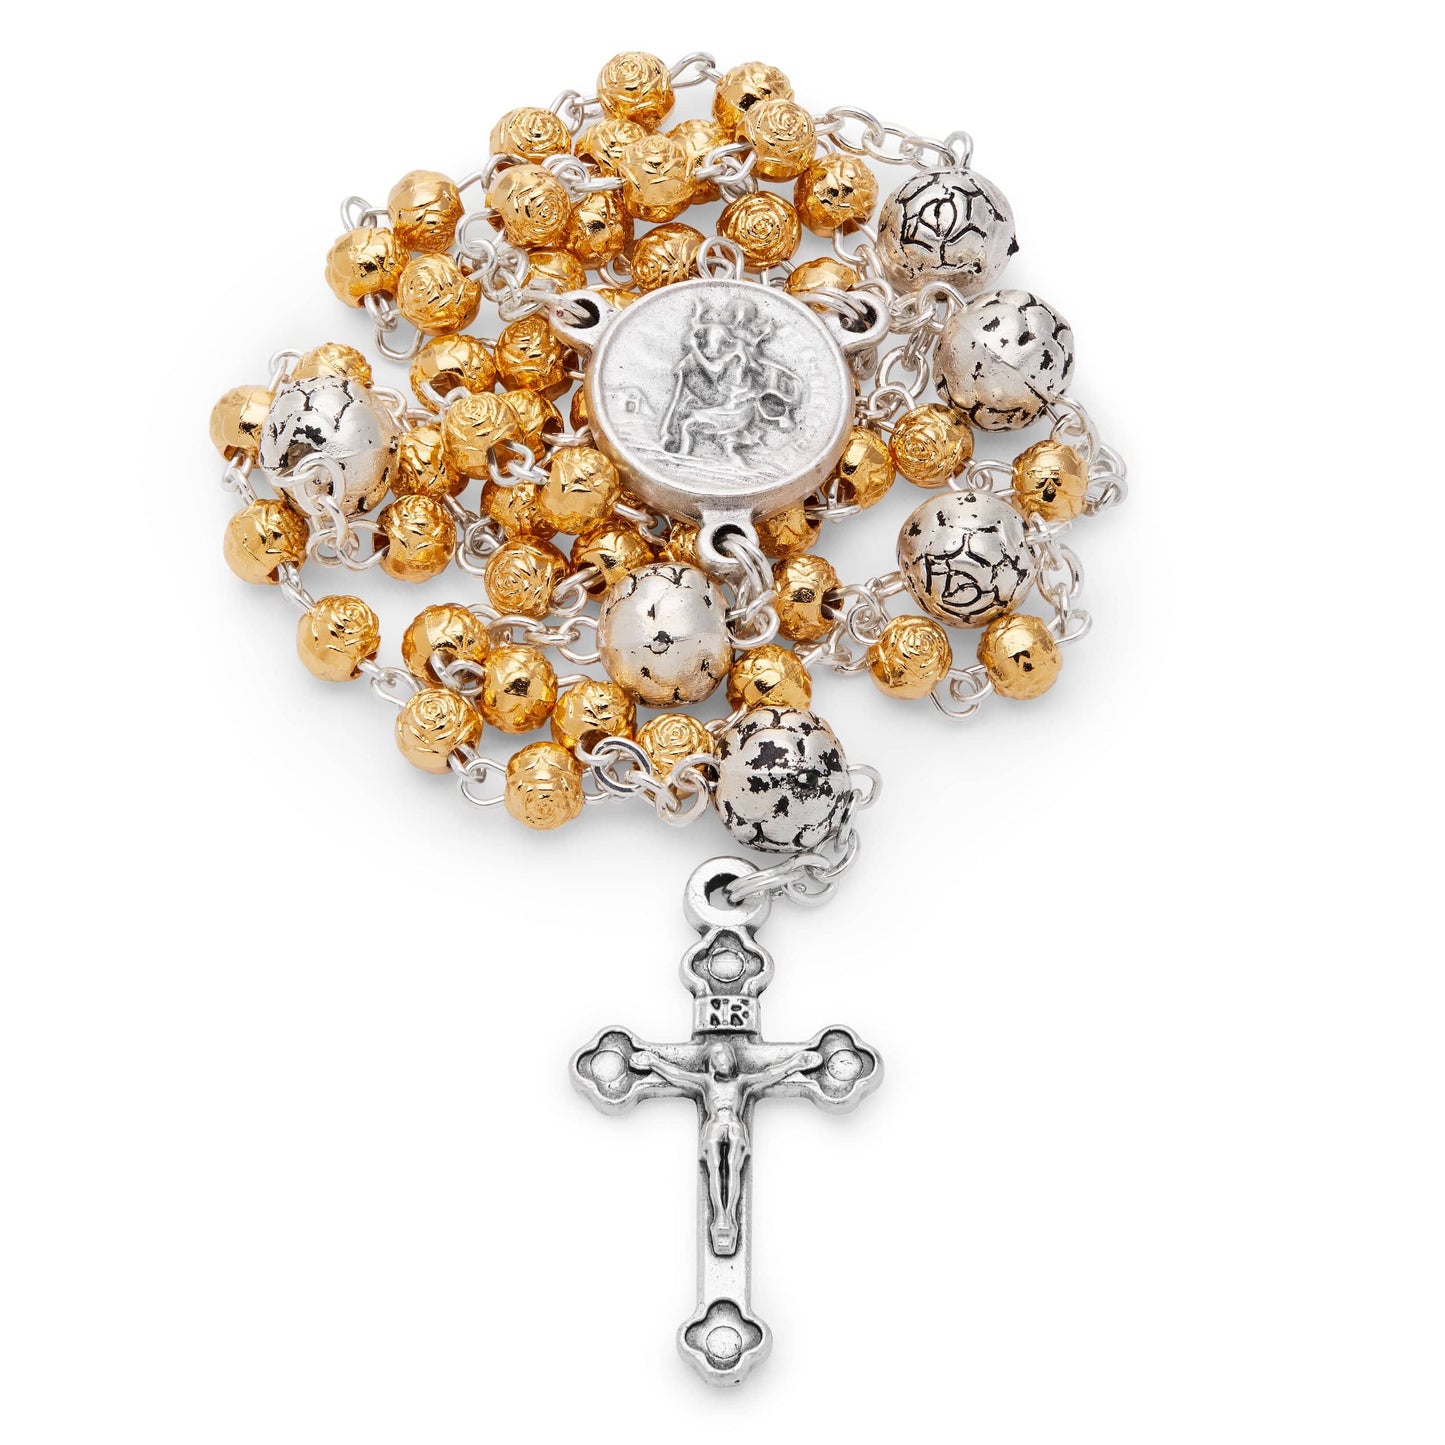 MONDO CATTOLICO Prayer Beads 32 cm (12.6 in) / 4 mm (0.15 in) Saint Christopher Case and Rosary